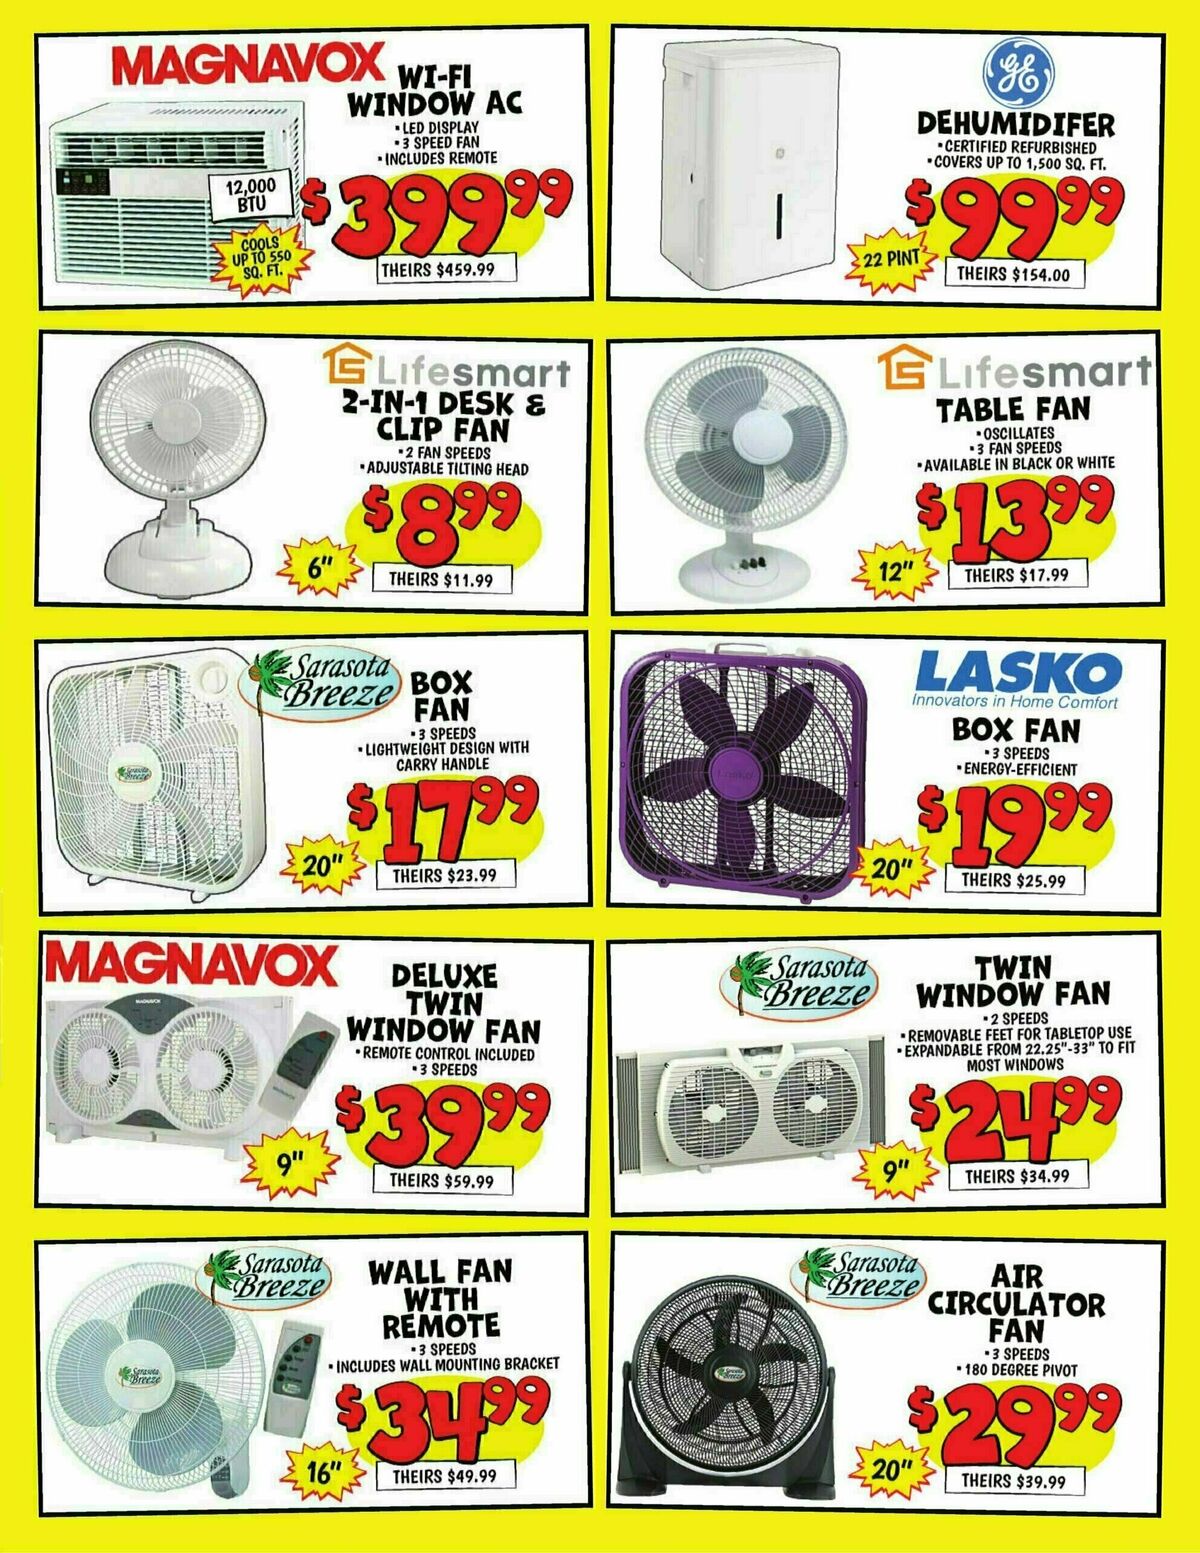 Ollie's Bargain Outlet Weekly Ad from June 30